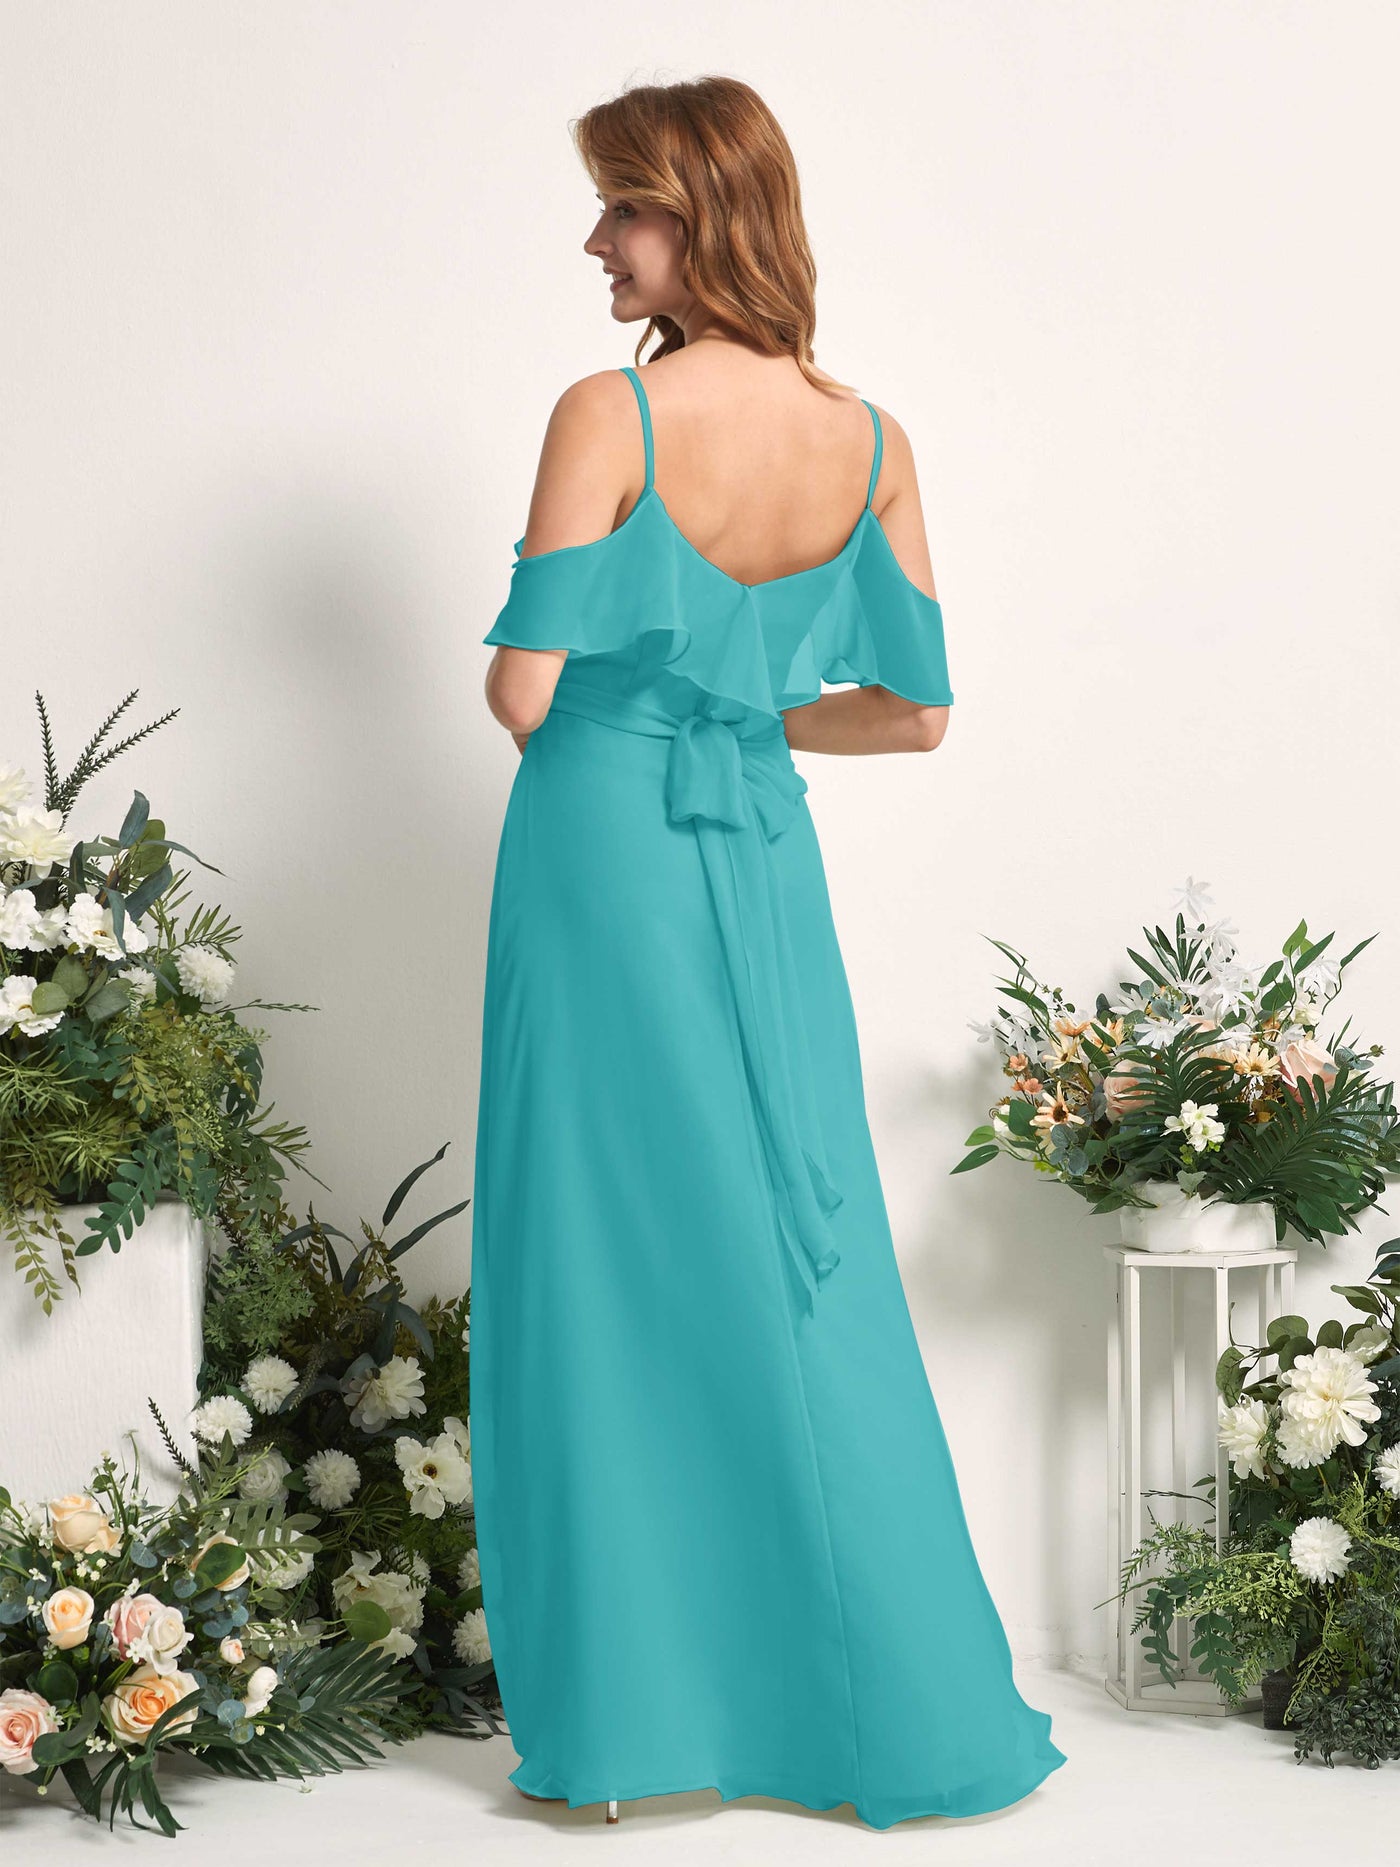 Bridesmaid Dress A-line Chiffon Spaghetti-straps Full Length Sleeveless Wedding Party Dress - Turquoise (81227423)#color_turquoise